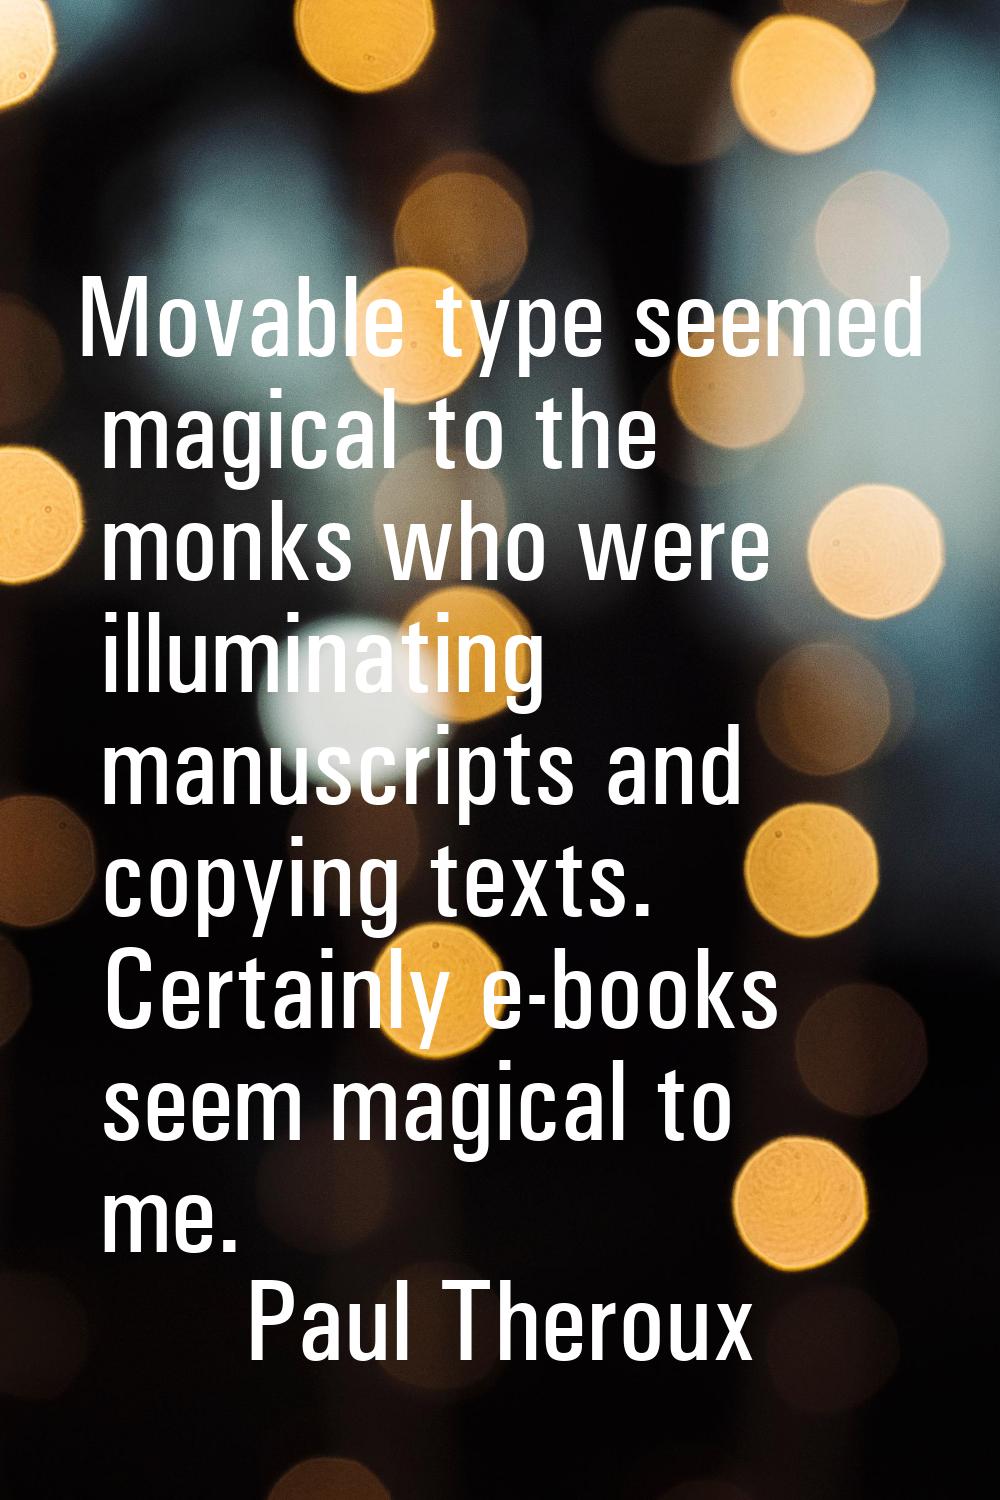 Movable type seemed magical to the monks who were illuminating manuscripts and copying texts. Certa